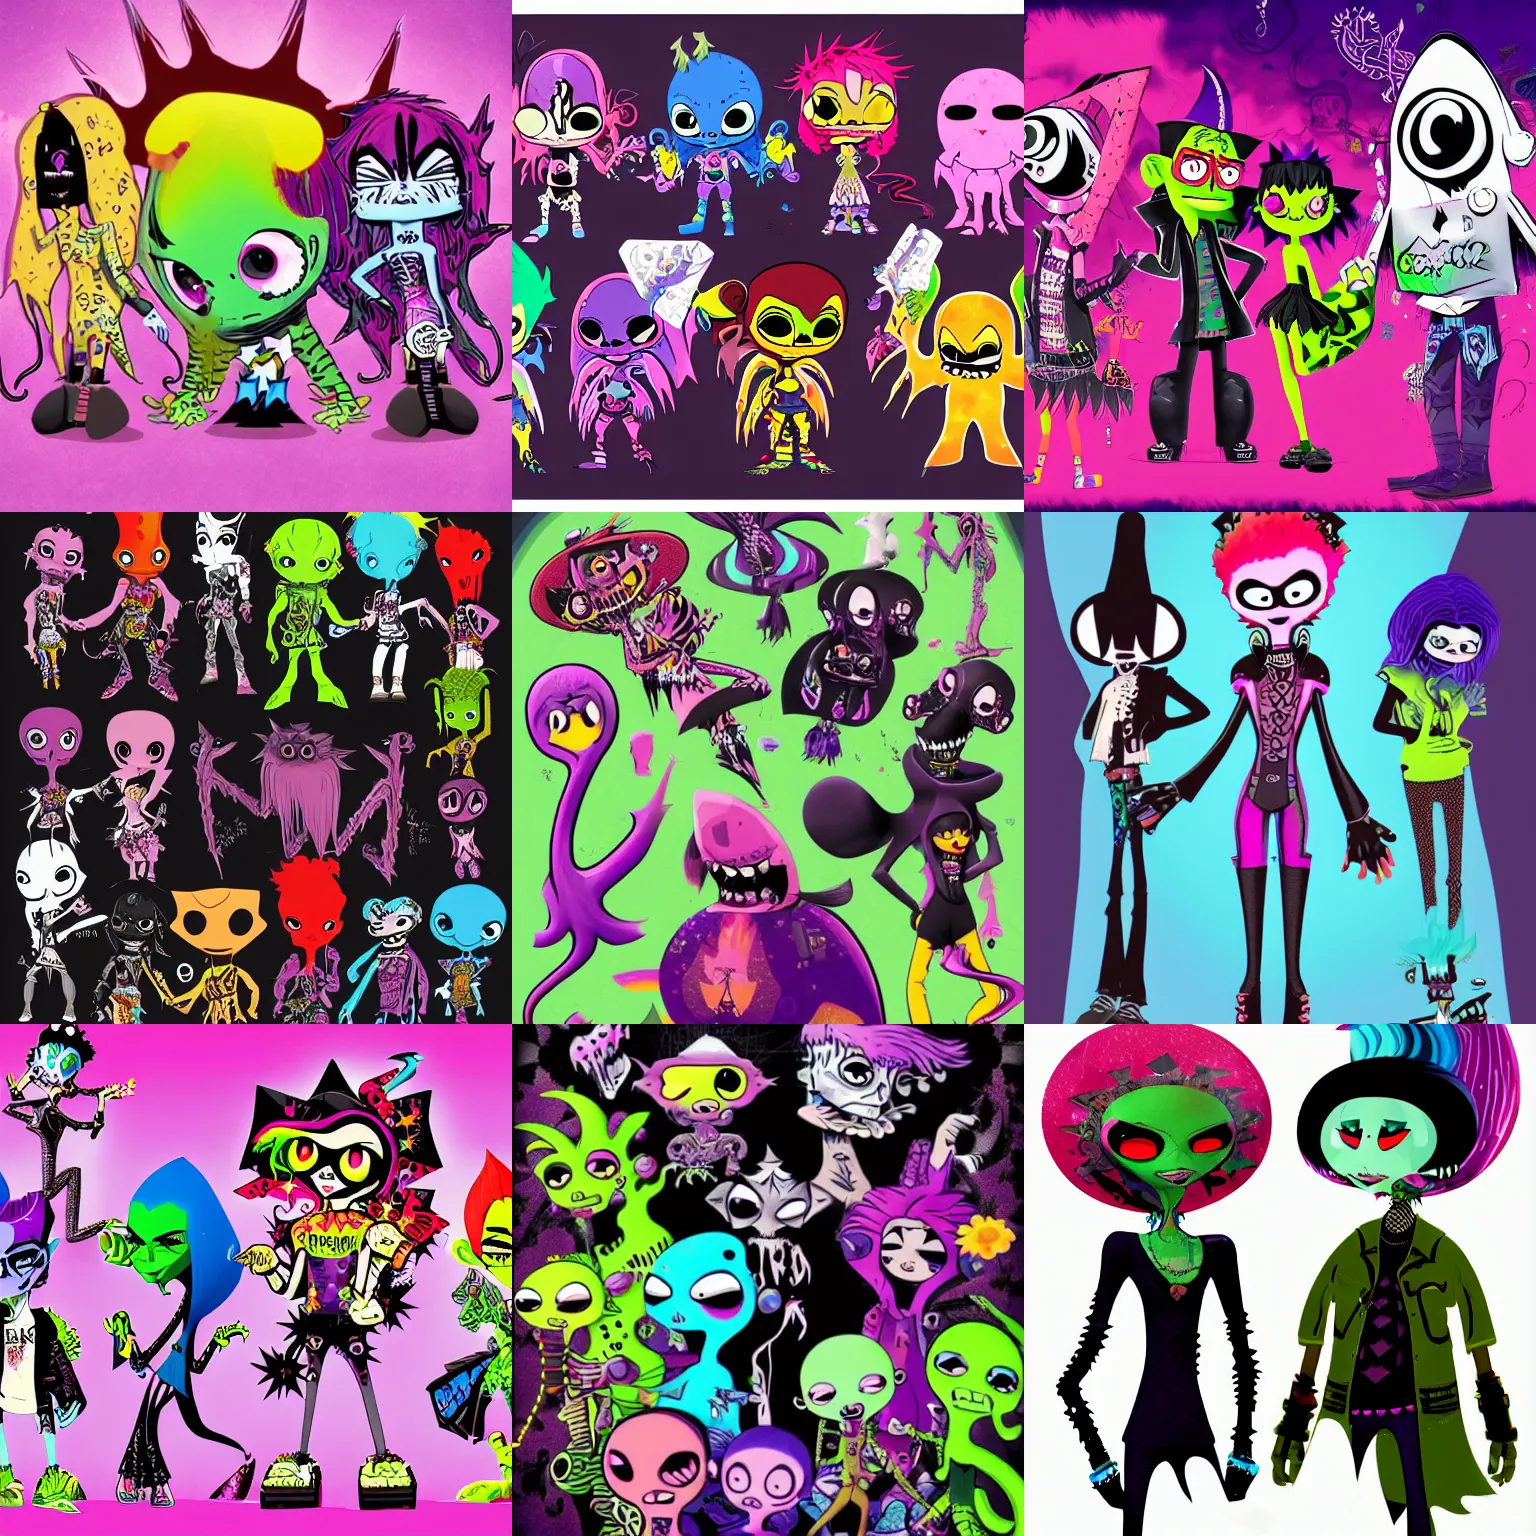 Prompt: lisa frank gothic punk vampiric rockstar vampire squid concept character designs of various shapes and sizes by genndy tartakovsky and the creators of fret nice at pieces interactive and splatoon by nintendo and the psychonauts by doublefine tim shafer artists for the new hotel transylvania film managed by Jamie Hewlett from gorillaz